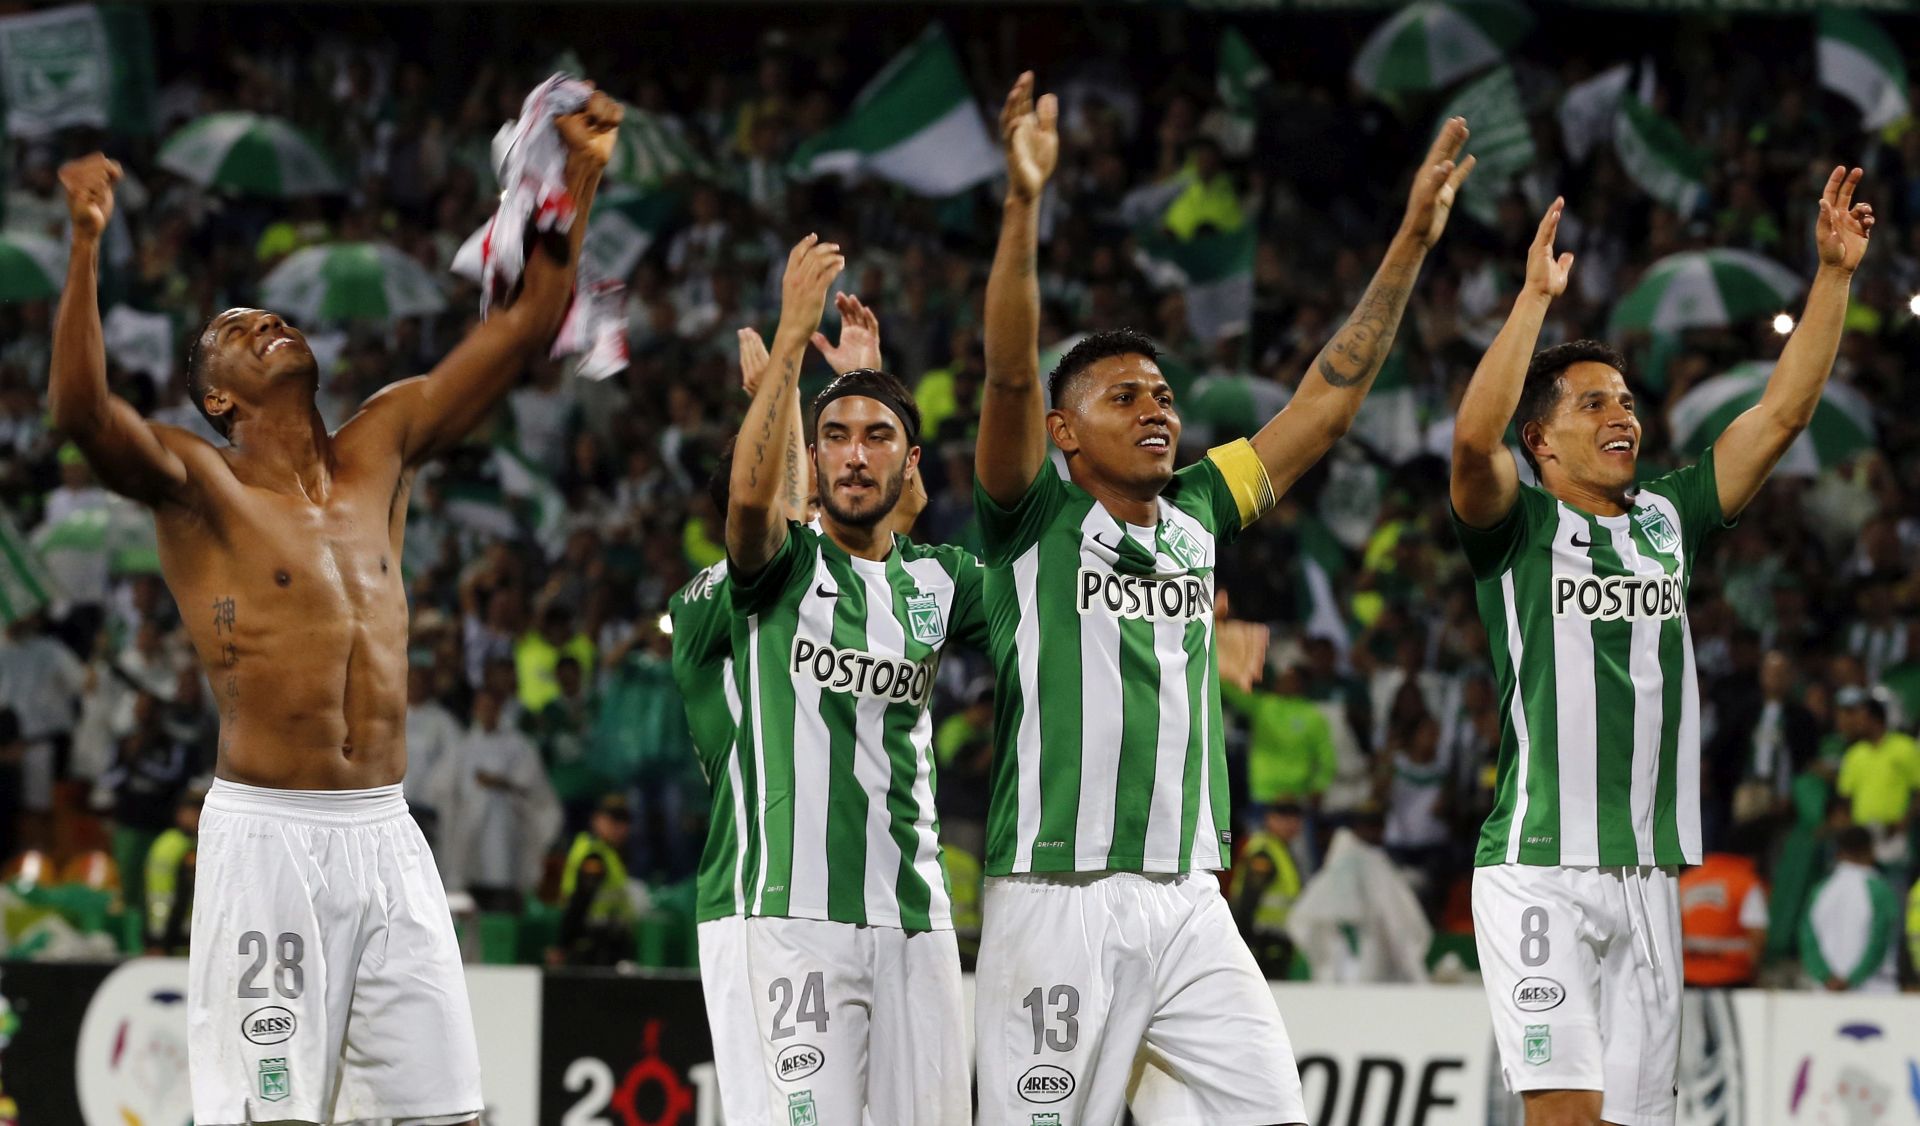 epa05423773 Players of the Atletico Nacional soccer team celebrate their victory against Sao Paulo during the second game of the semifinal of the Copa Libertadores 2016 soccer tournament at the Atanasio Girardot stadium in Medellin, Colombia, 13 July 2016.  EPA/MAURICIO DUENAS CASTANEDA